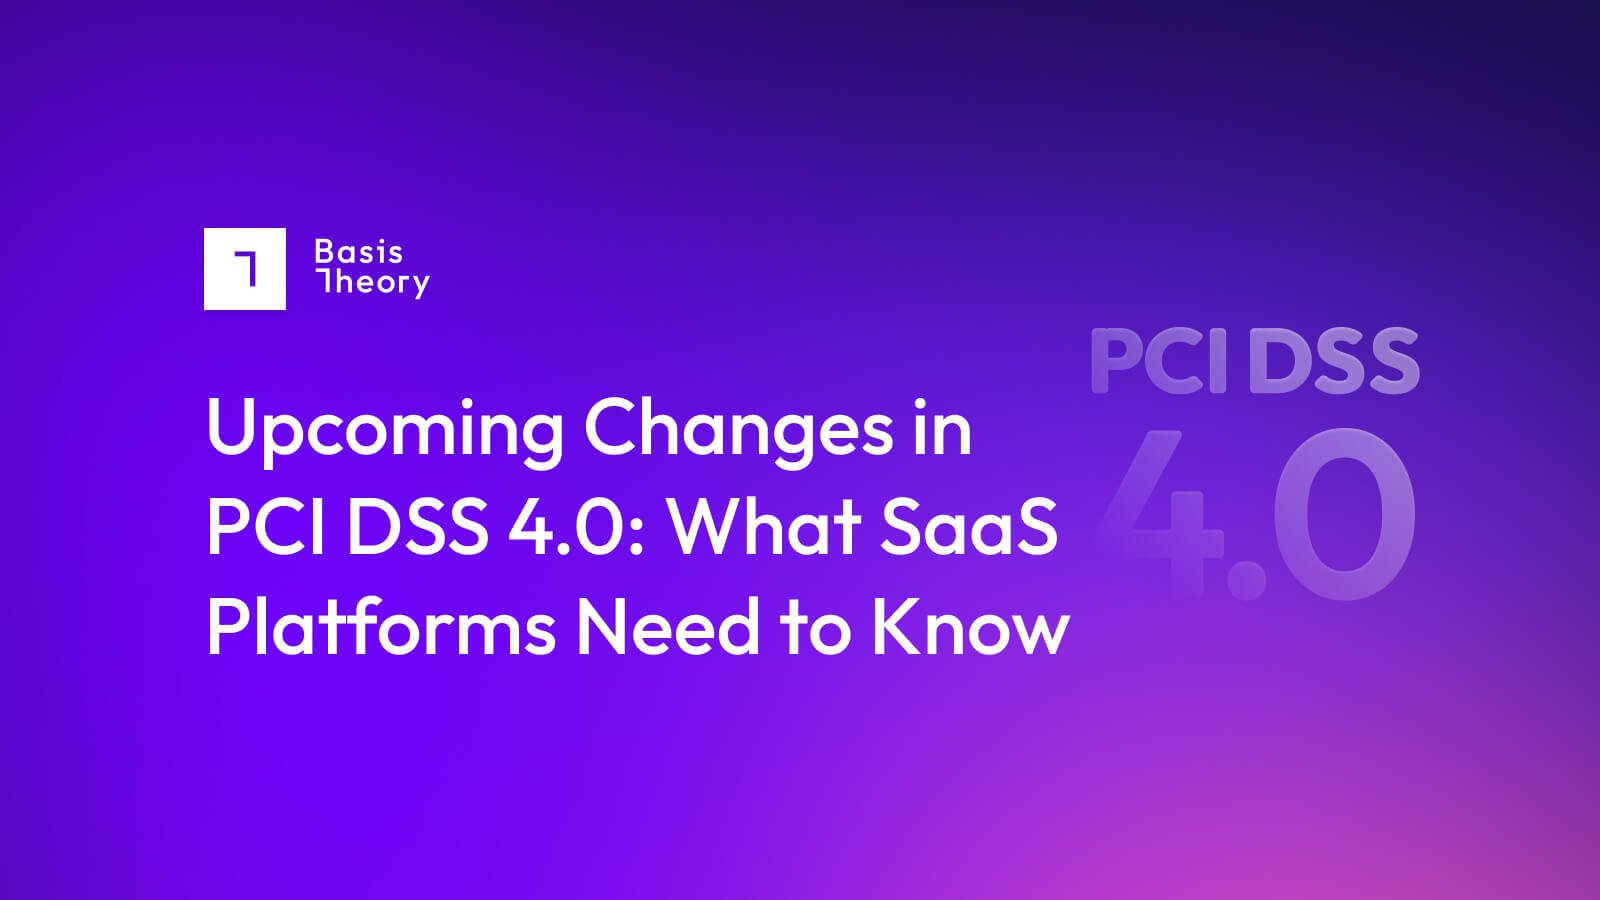 PCI DSS 4.0 Changes You Need to Know